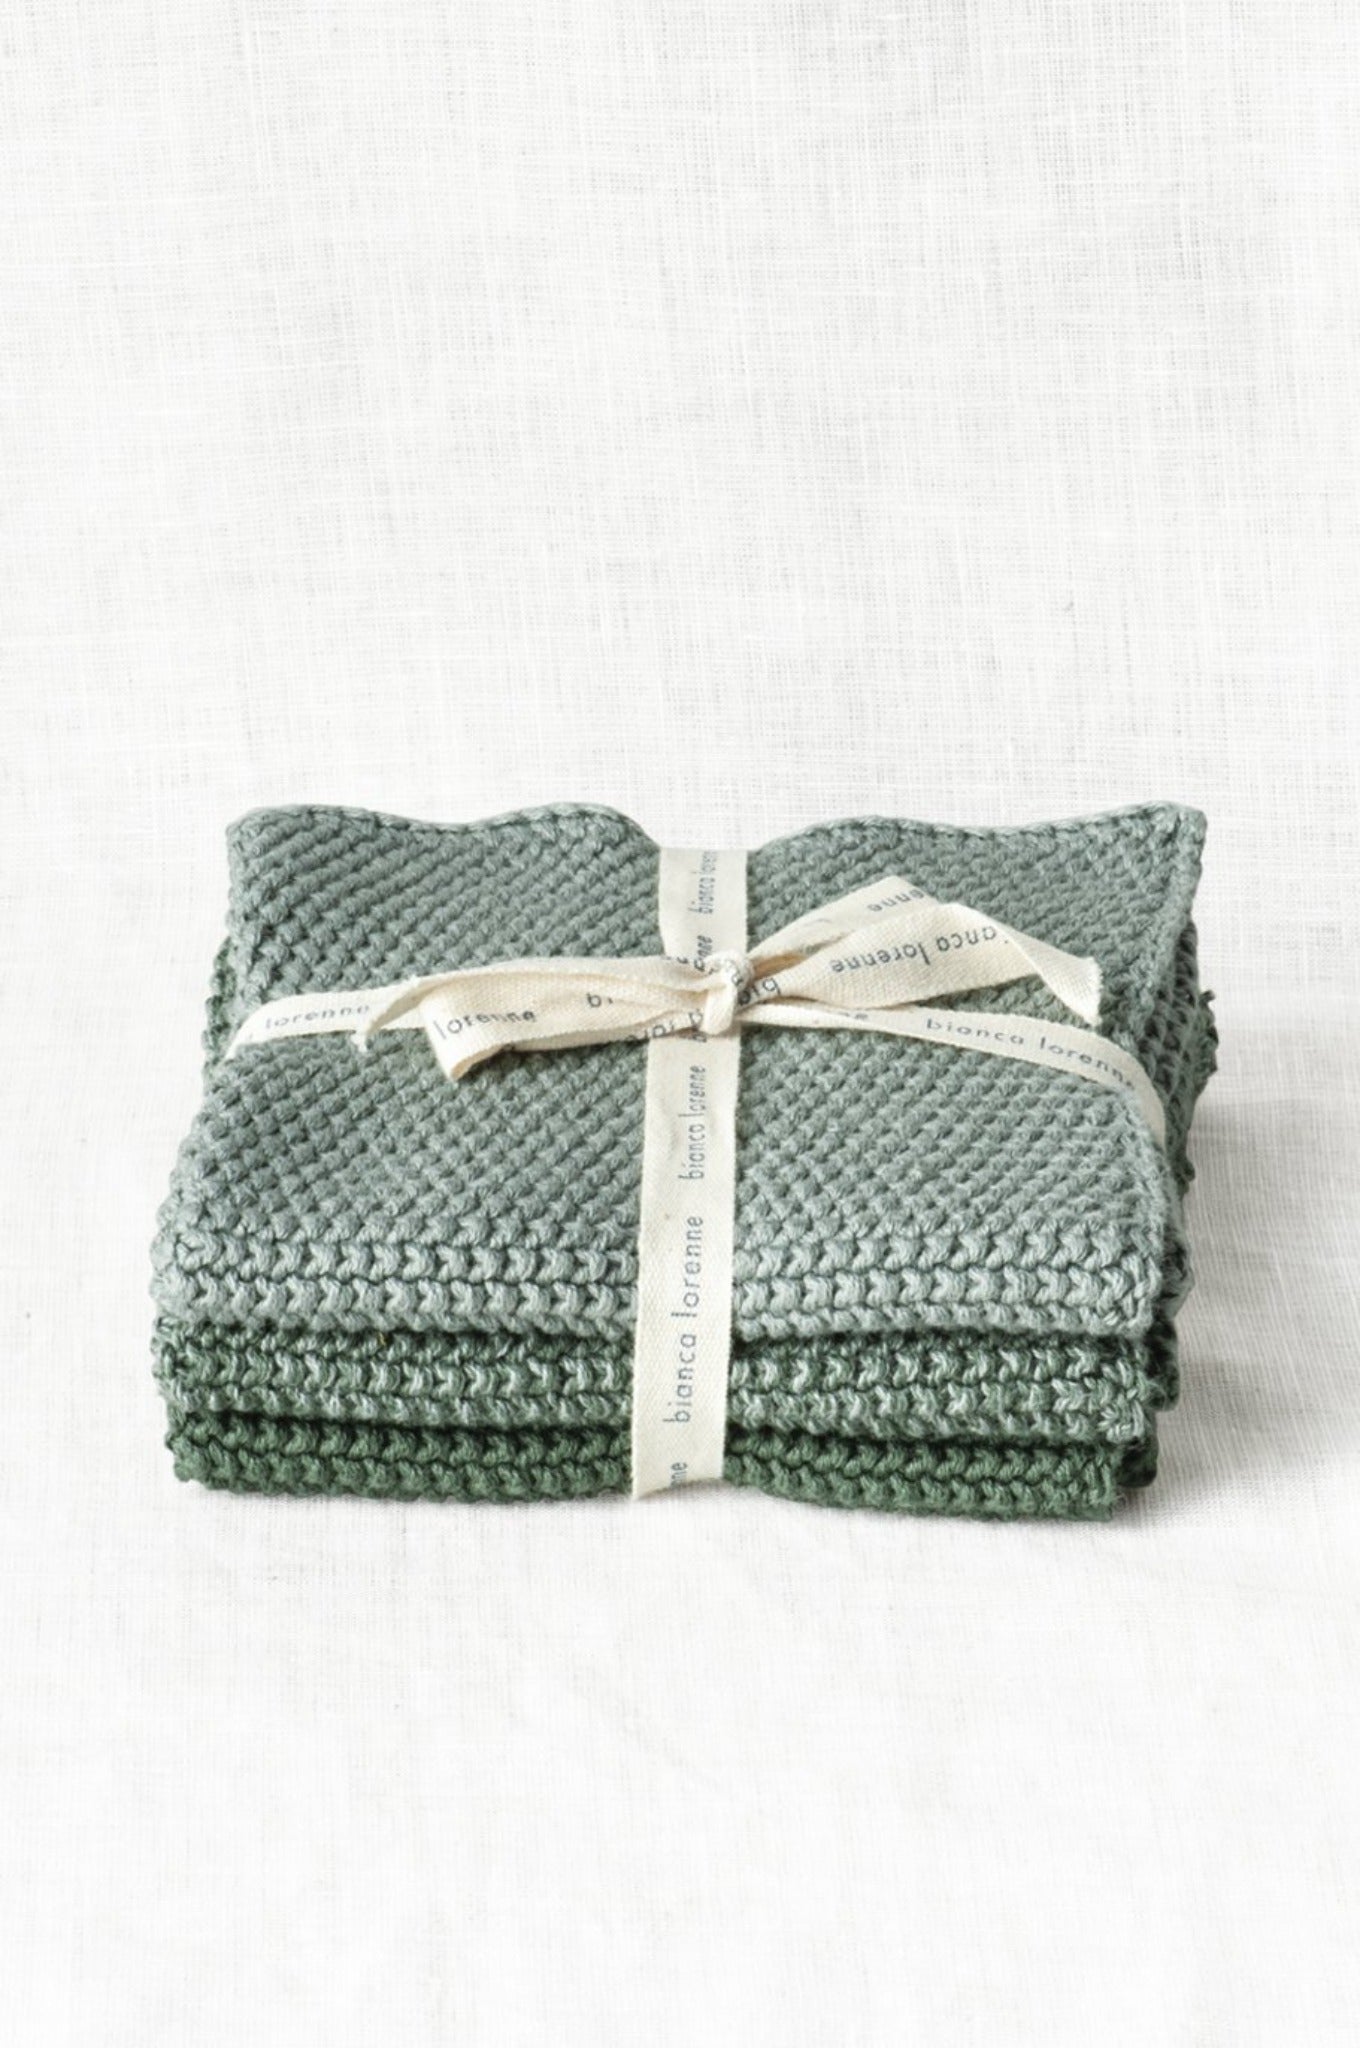 Bianca Lorenne pure cotton knitted washcloths, set of 3 in shades of sage green.